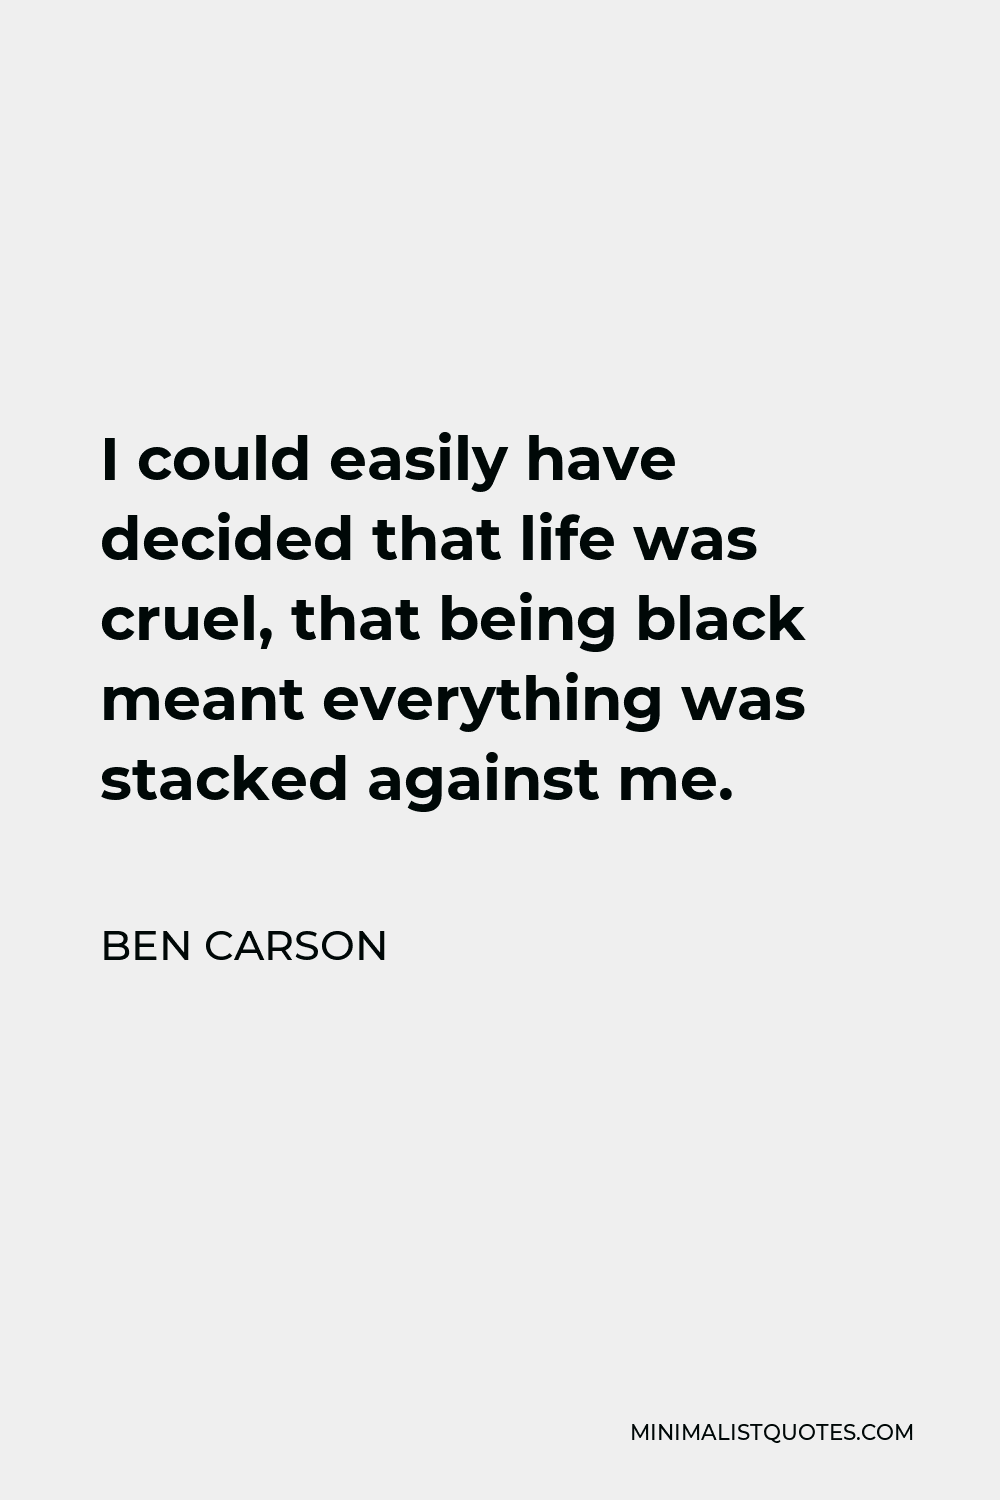 Ben Carson Quote - I could easily have decided that life was cruel, that being black meant everything was stacked against me.